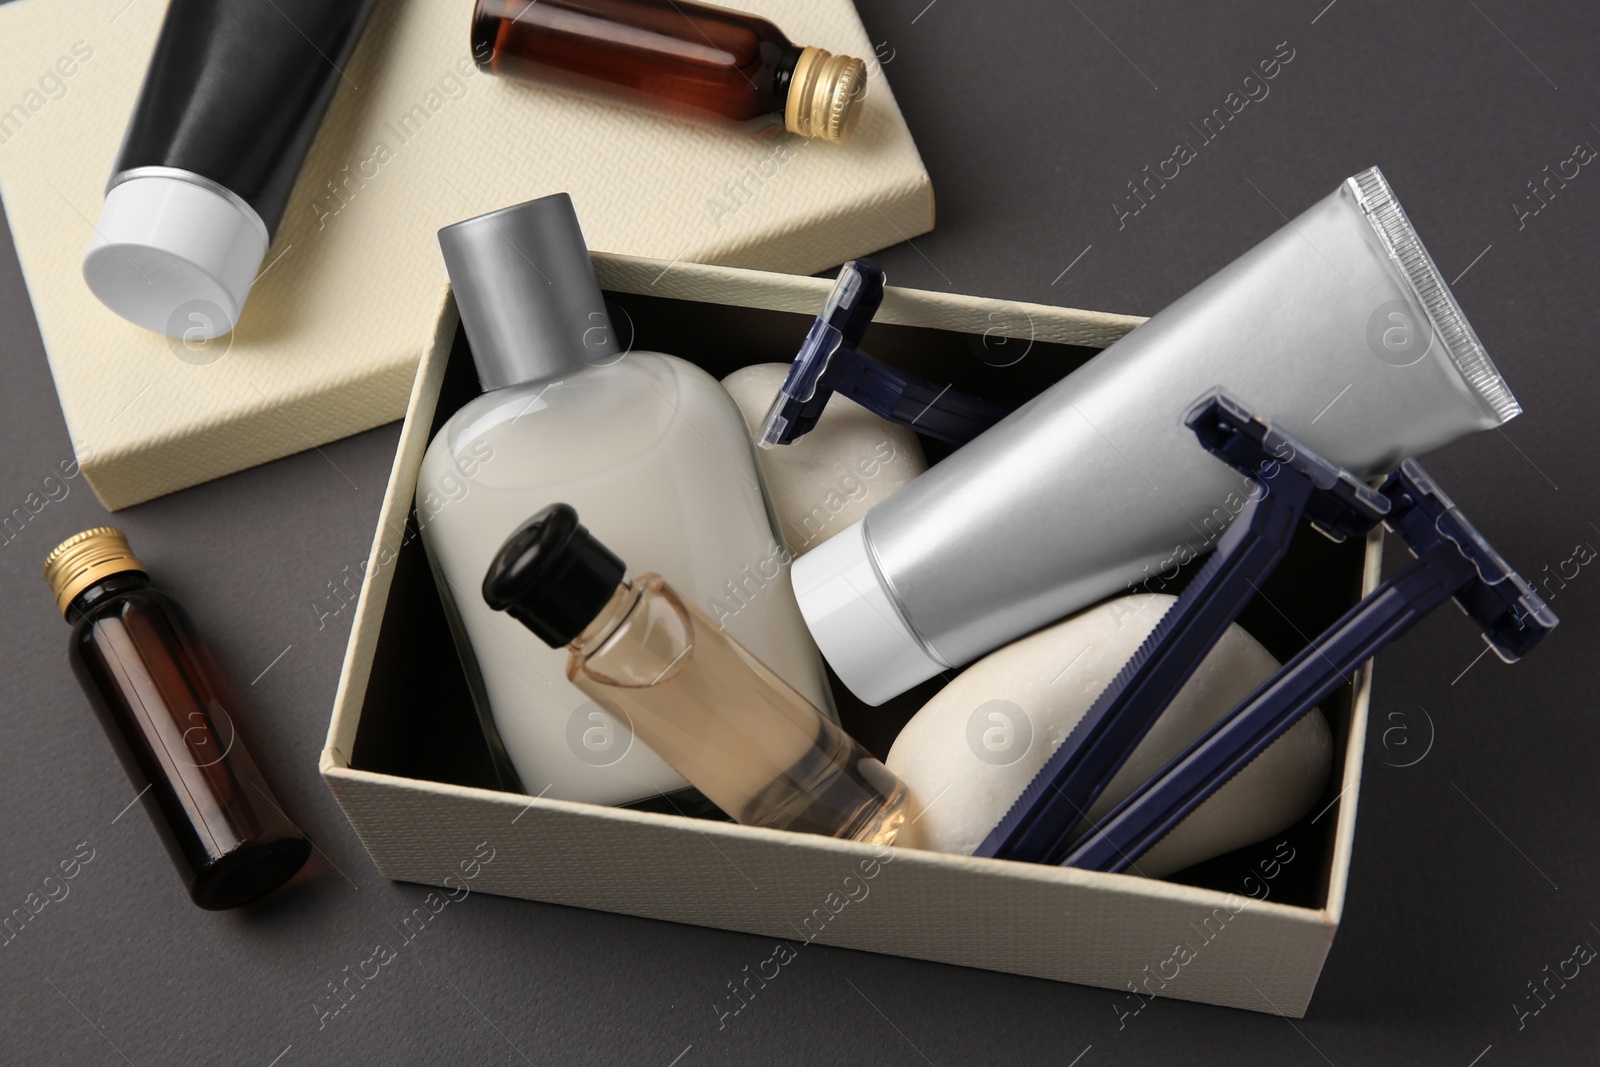 Photo of Different men's shaving accessories and box on dark grey background